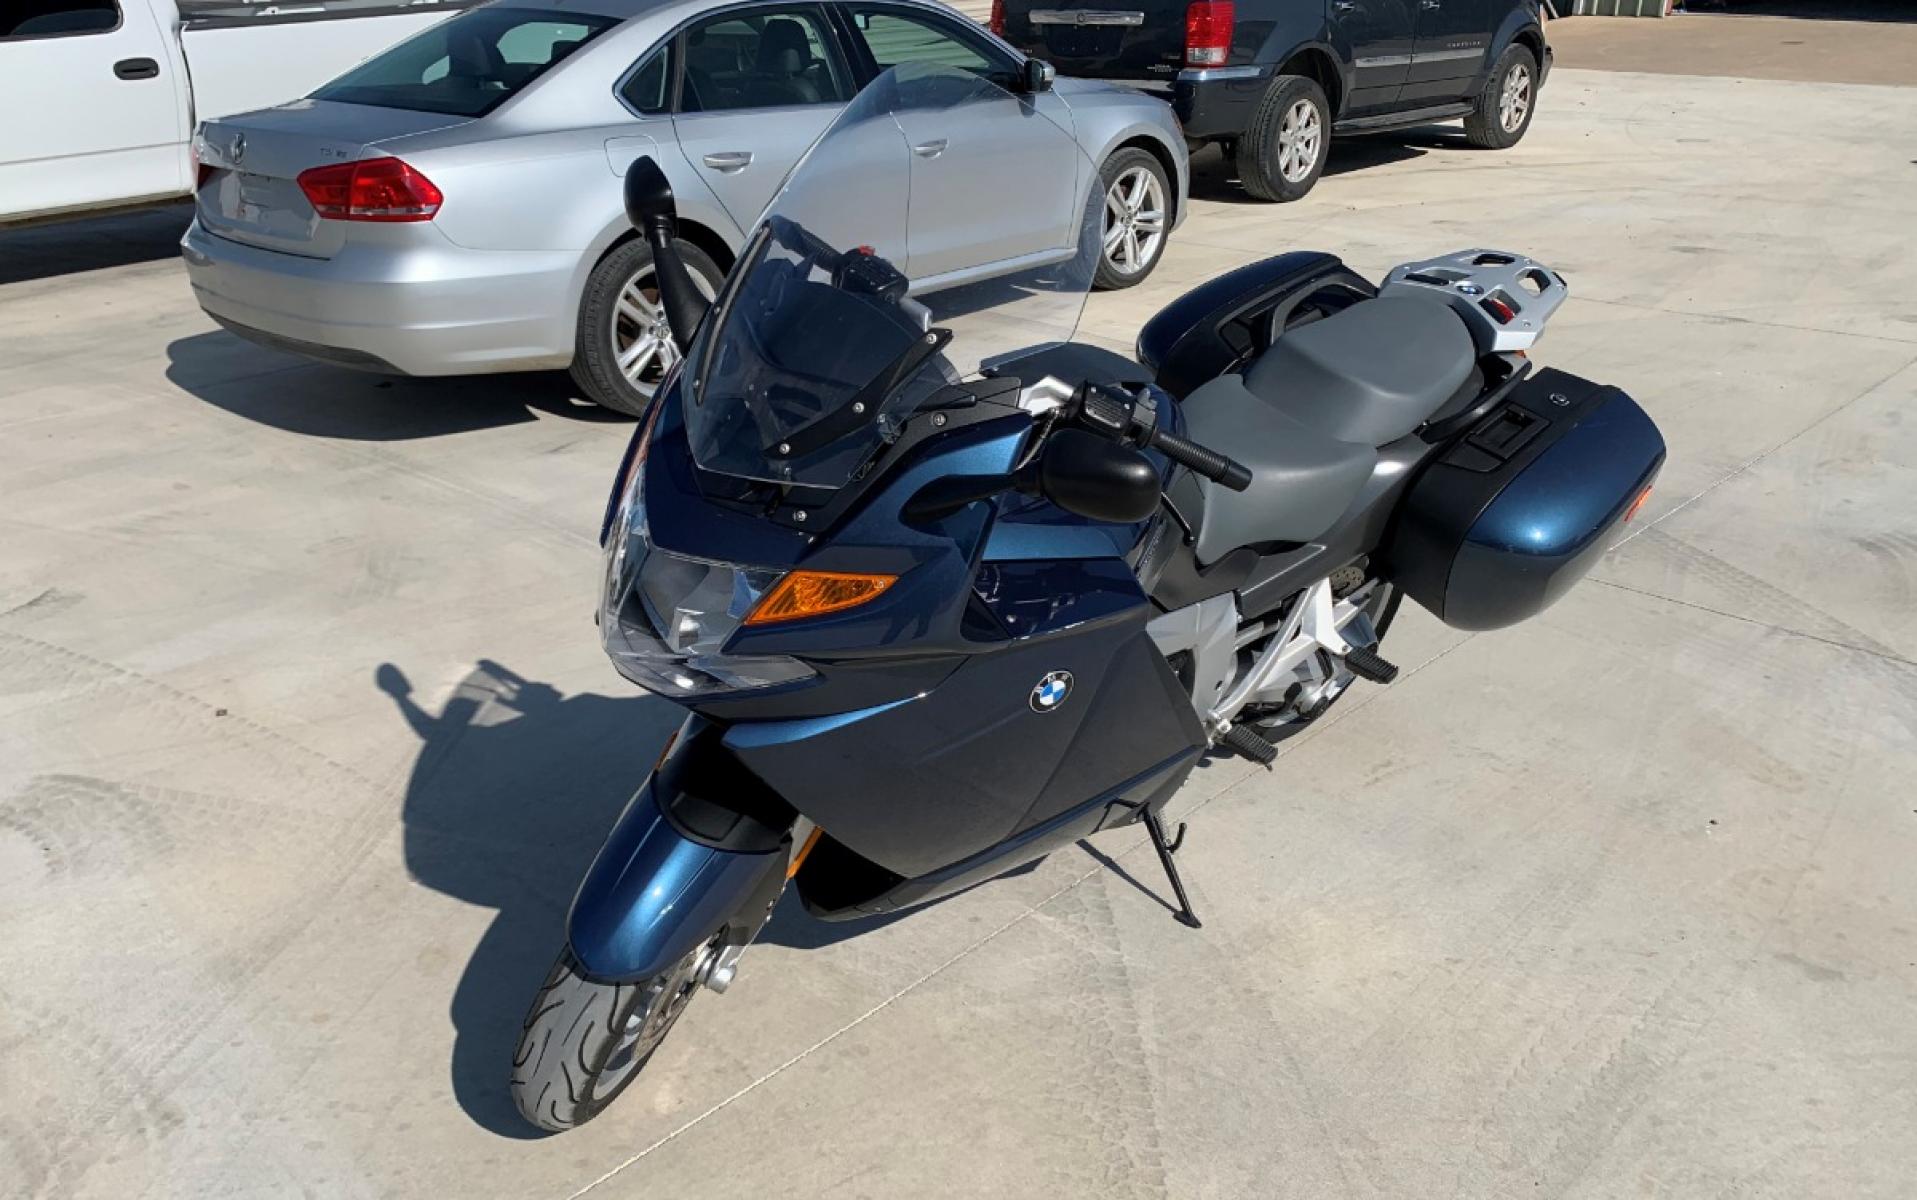 2007 BLUE BMW K1200GT K1200 (WB10597087Z) with an 1157CC engine, located at 17760 HWY 62, MORRIS, 74445, 35.609104, -95.877060 - THE 2007 BMW K1200GT IS A SPORT-TOURING MOTORCYCLE MADE BY BMW. THE SECOND GENERATION K1200GT, INTRODUCED IN 2006, USES ESSENTULY THE SAME INLINE-4 ENGINE AS THE BMW K1200S SPORTSBIKE, WHICH HELD THE WORLD SPEED RECORD IN 2005 FOR ITS CLASS AT 279.33 km/h (173.57 mph), AND THE K1200R. THE NEW MODEL - Photo #1